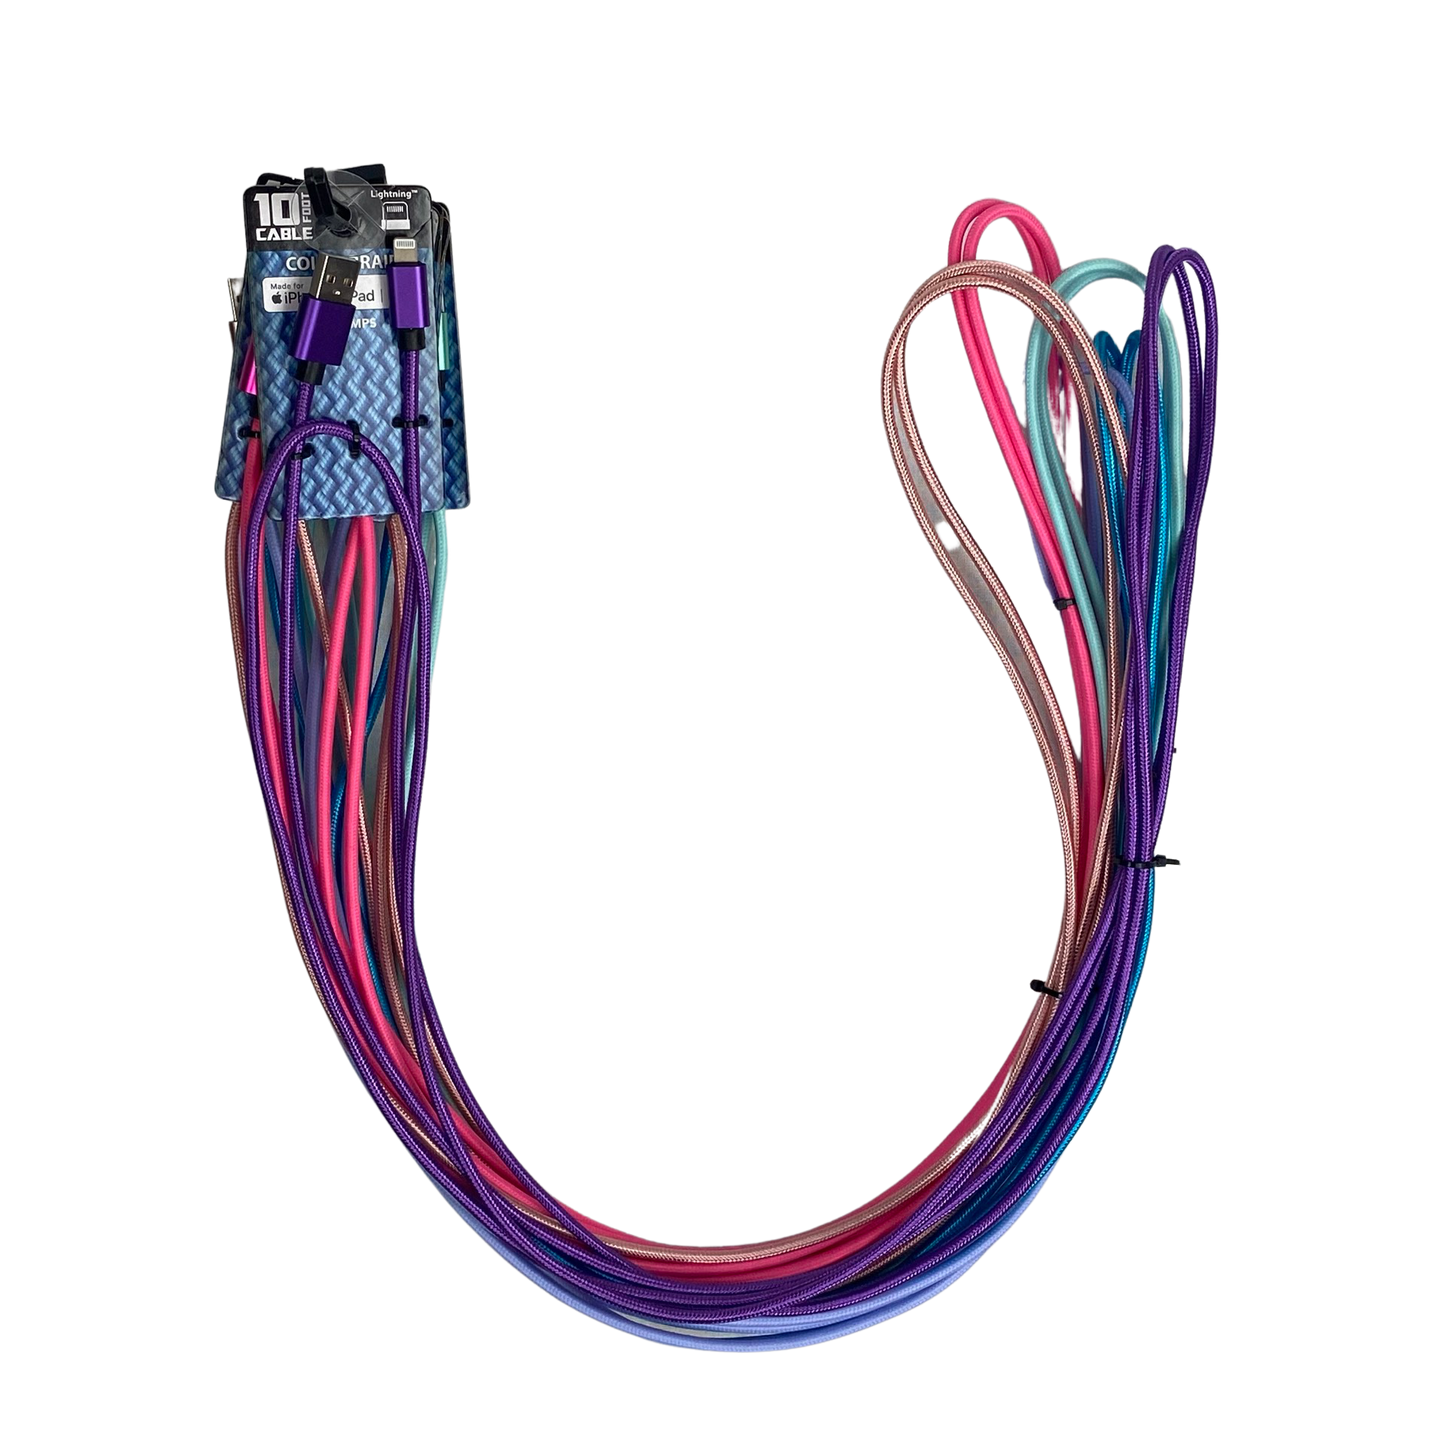 ITEM NUMBER 023070 10FT COLOR BRAID MFI CABLE - 6 PIECES PER PACK